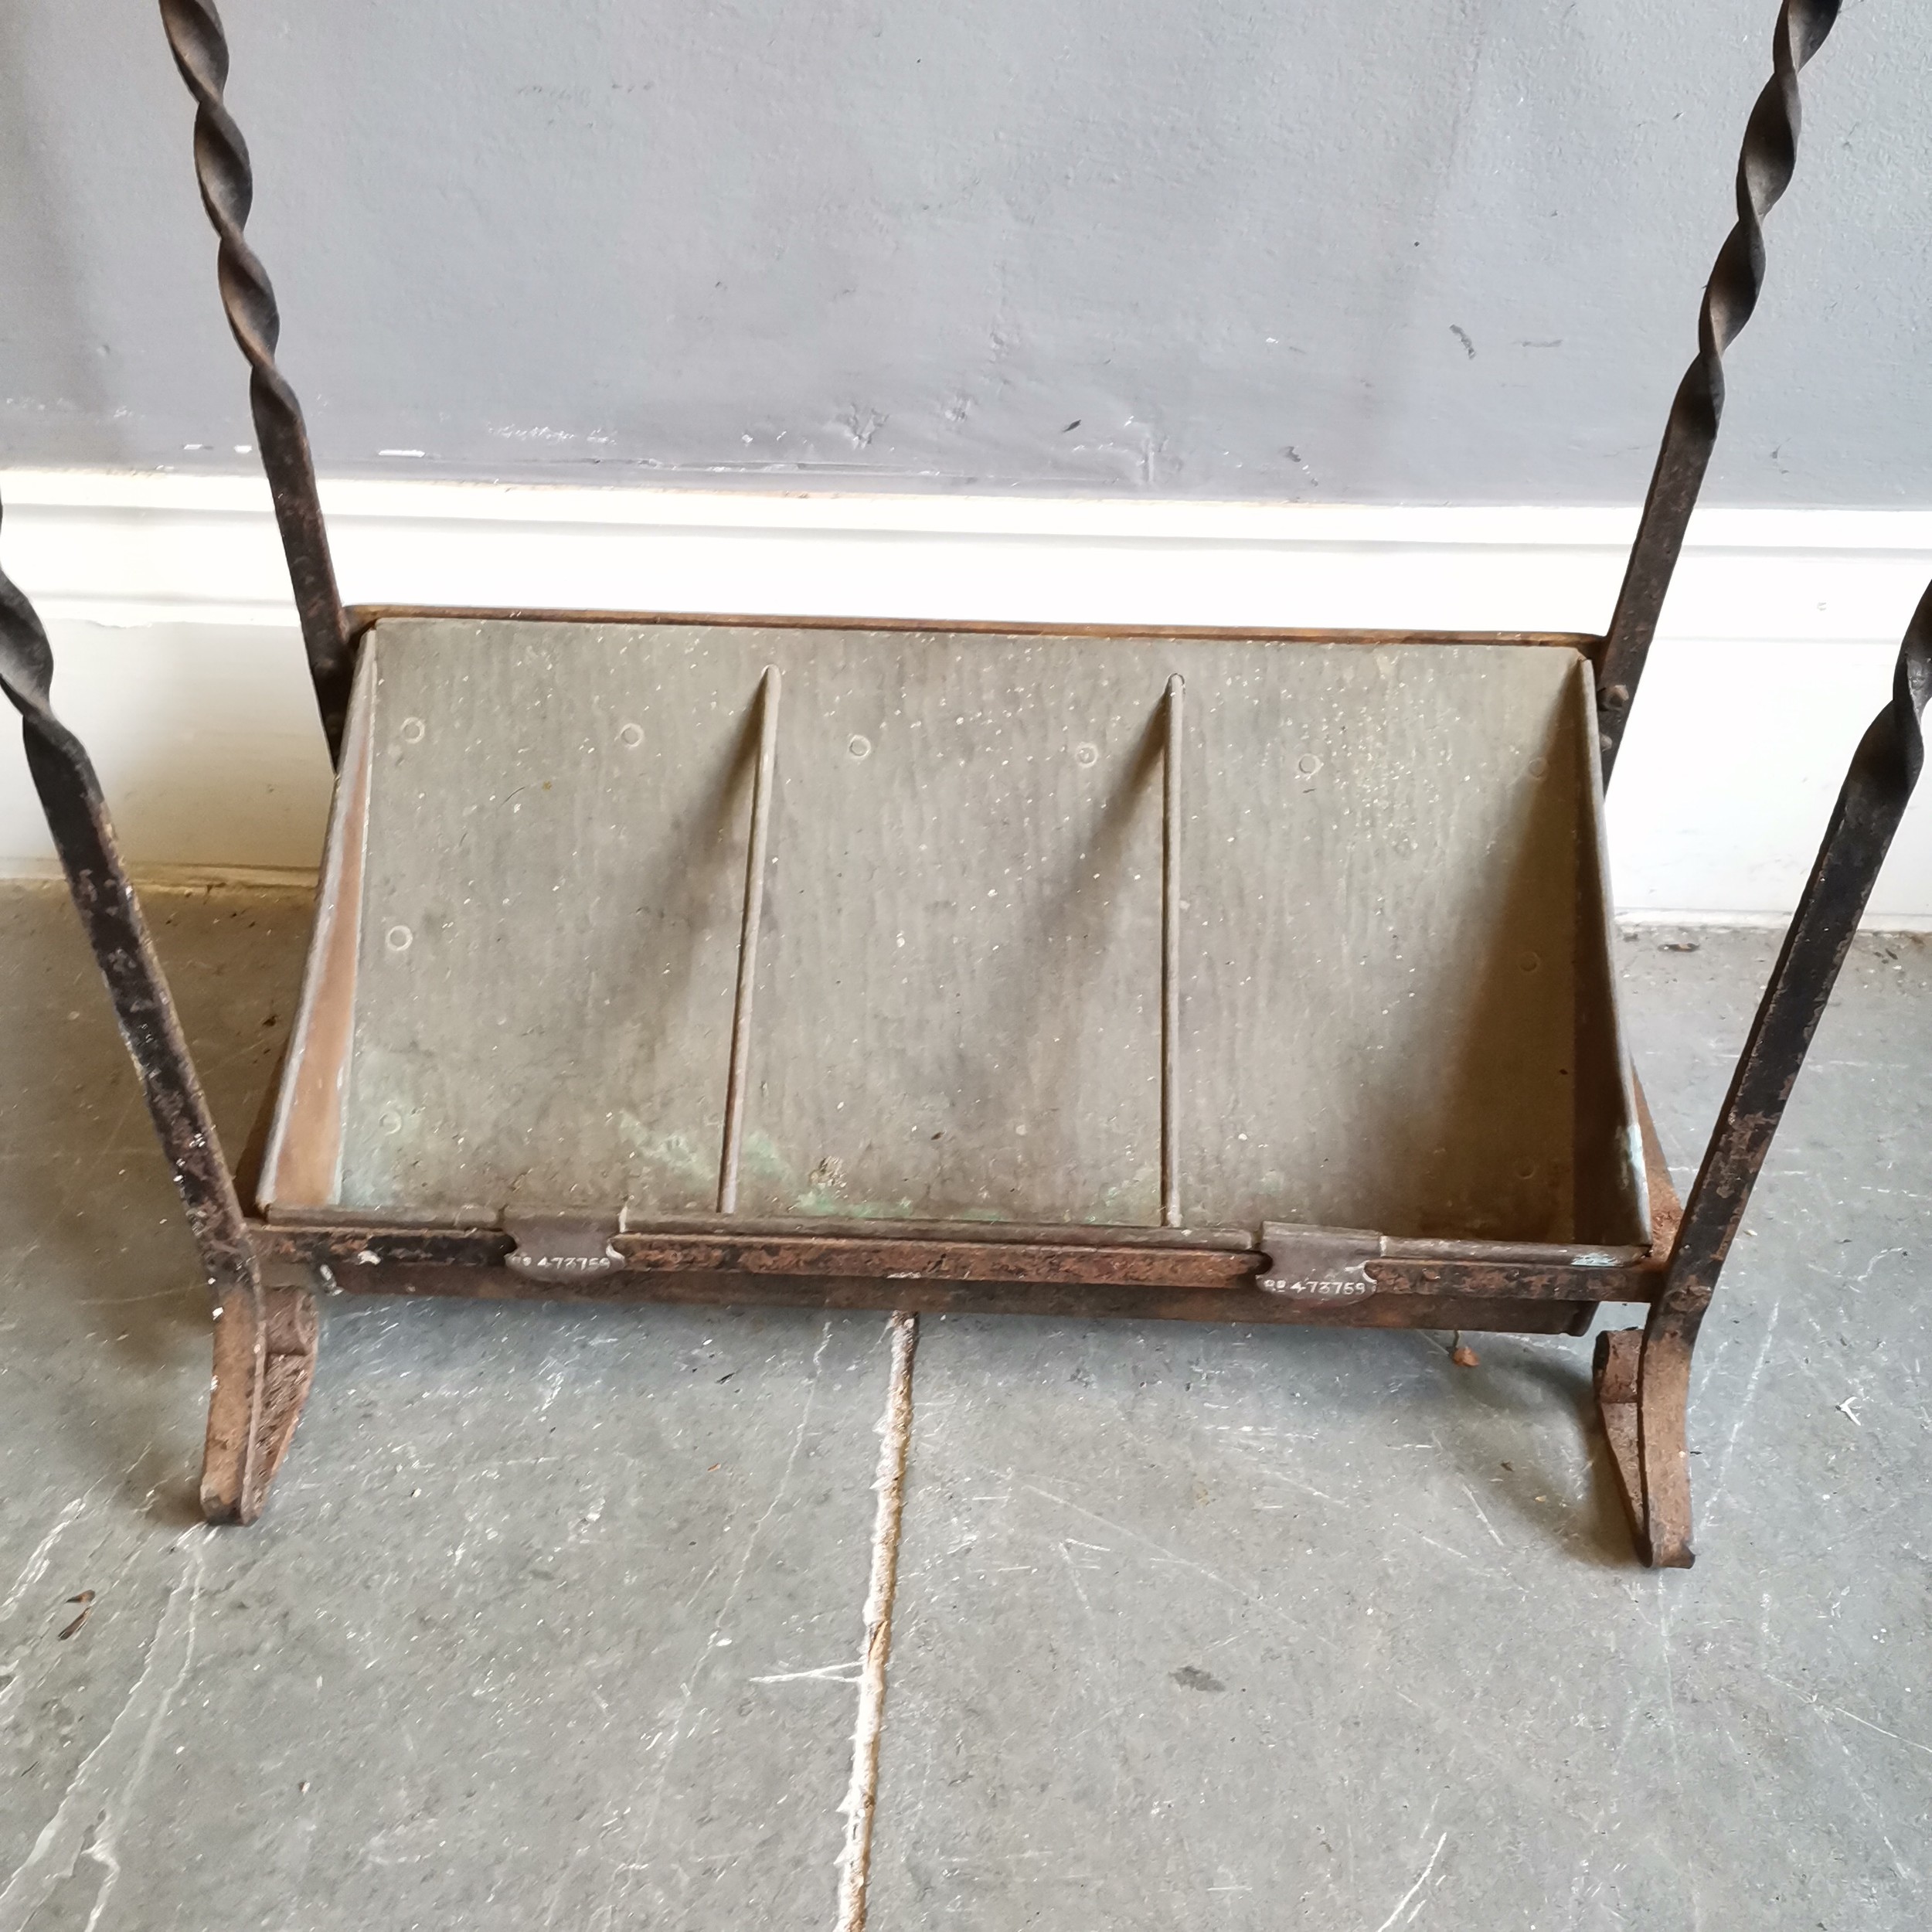 Antique wrought iron stick stand with brass & steel drip tray (Rd 473759) - 83cm high x 44cm wide - Image 4 of 4